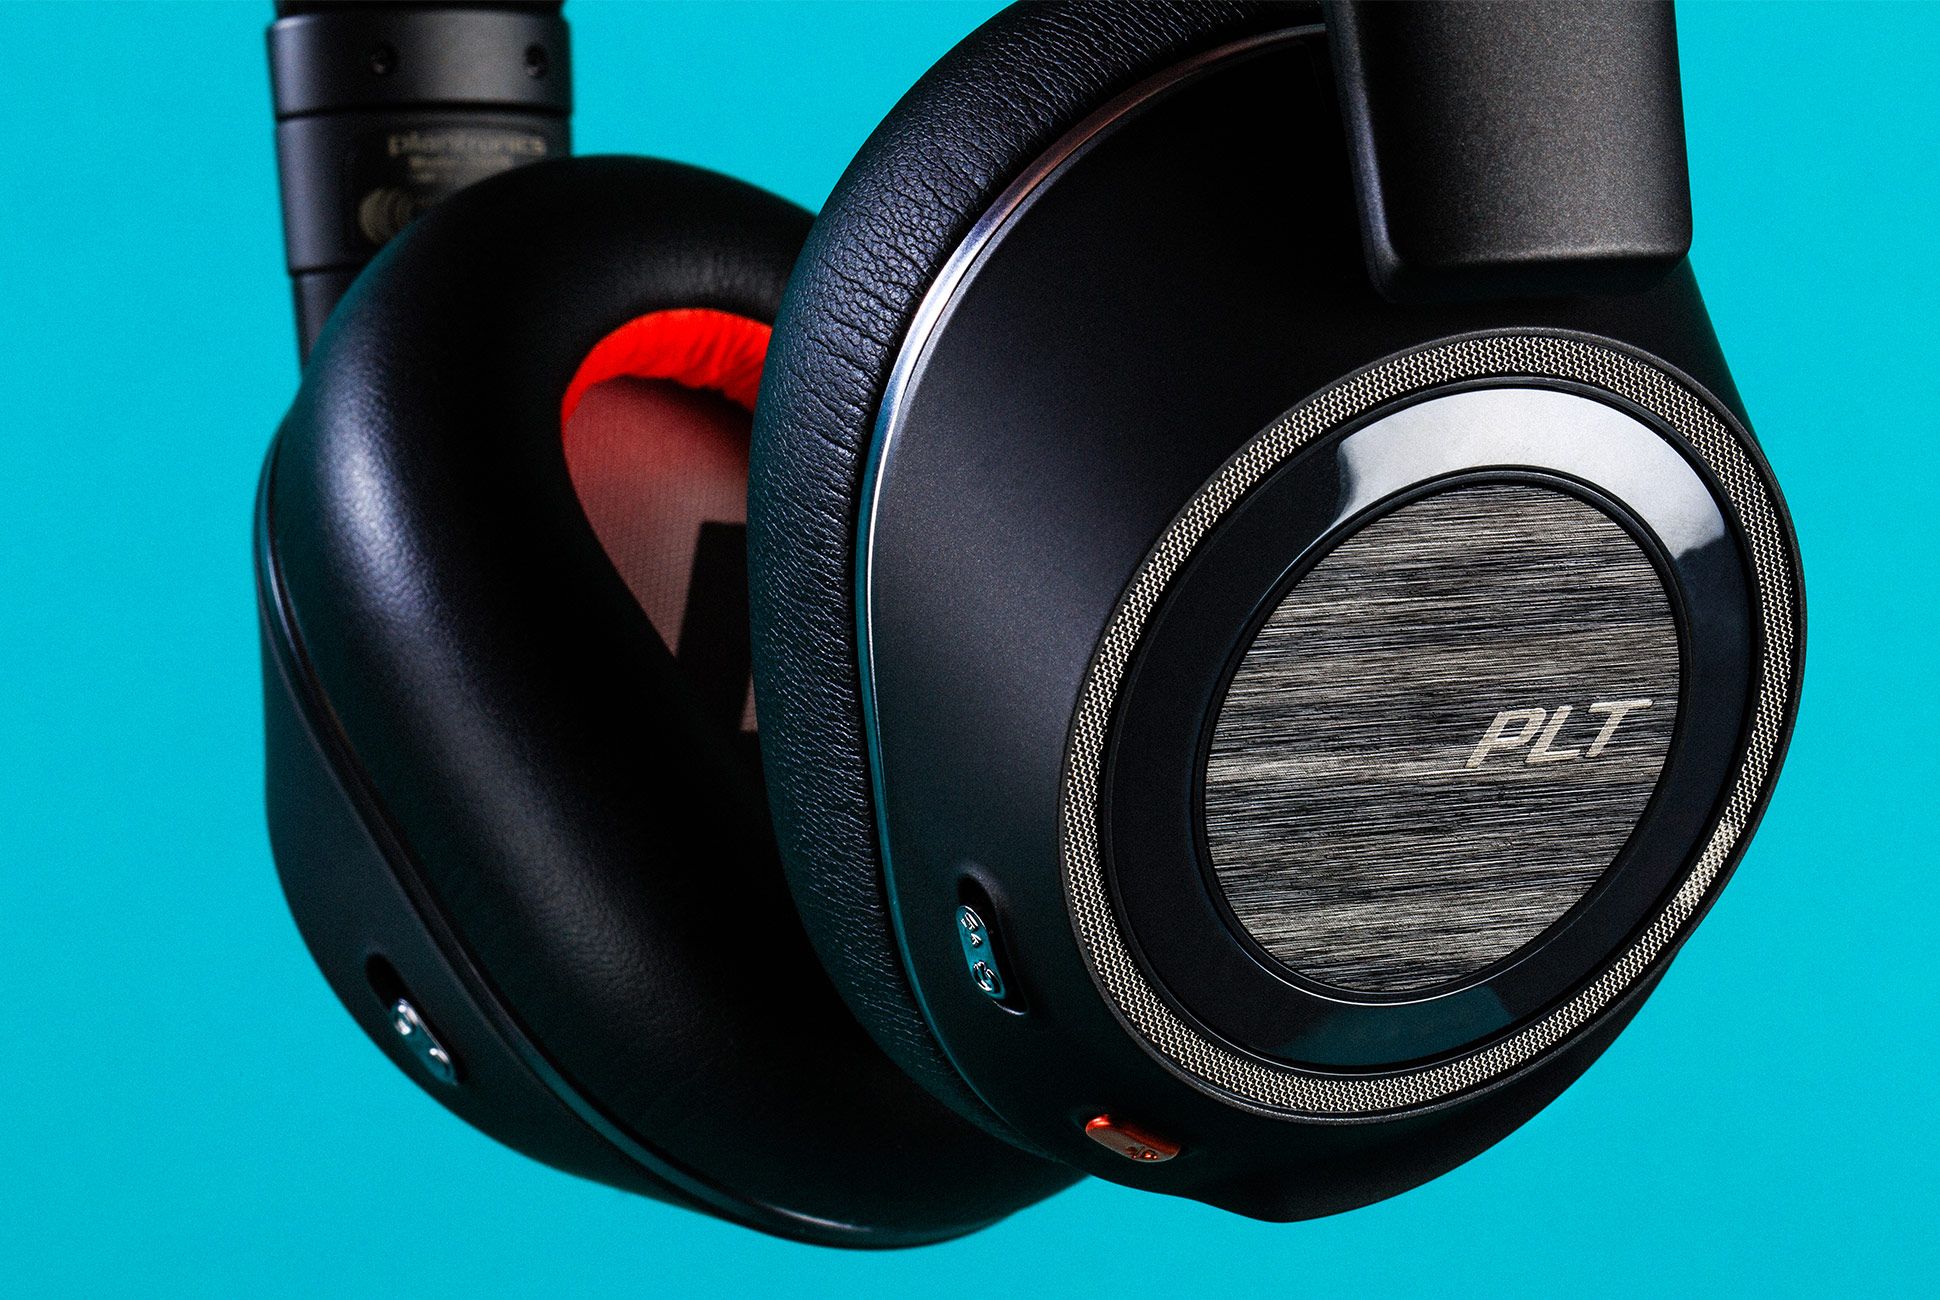 Review: The Perfect Noise-Canceling Headphones for Settings